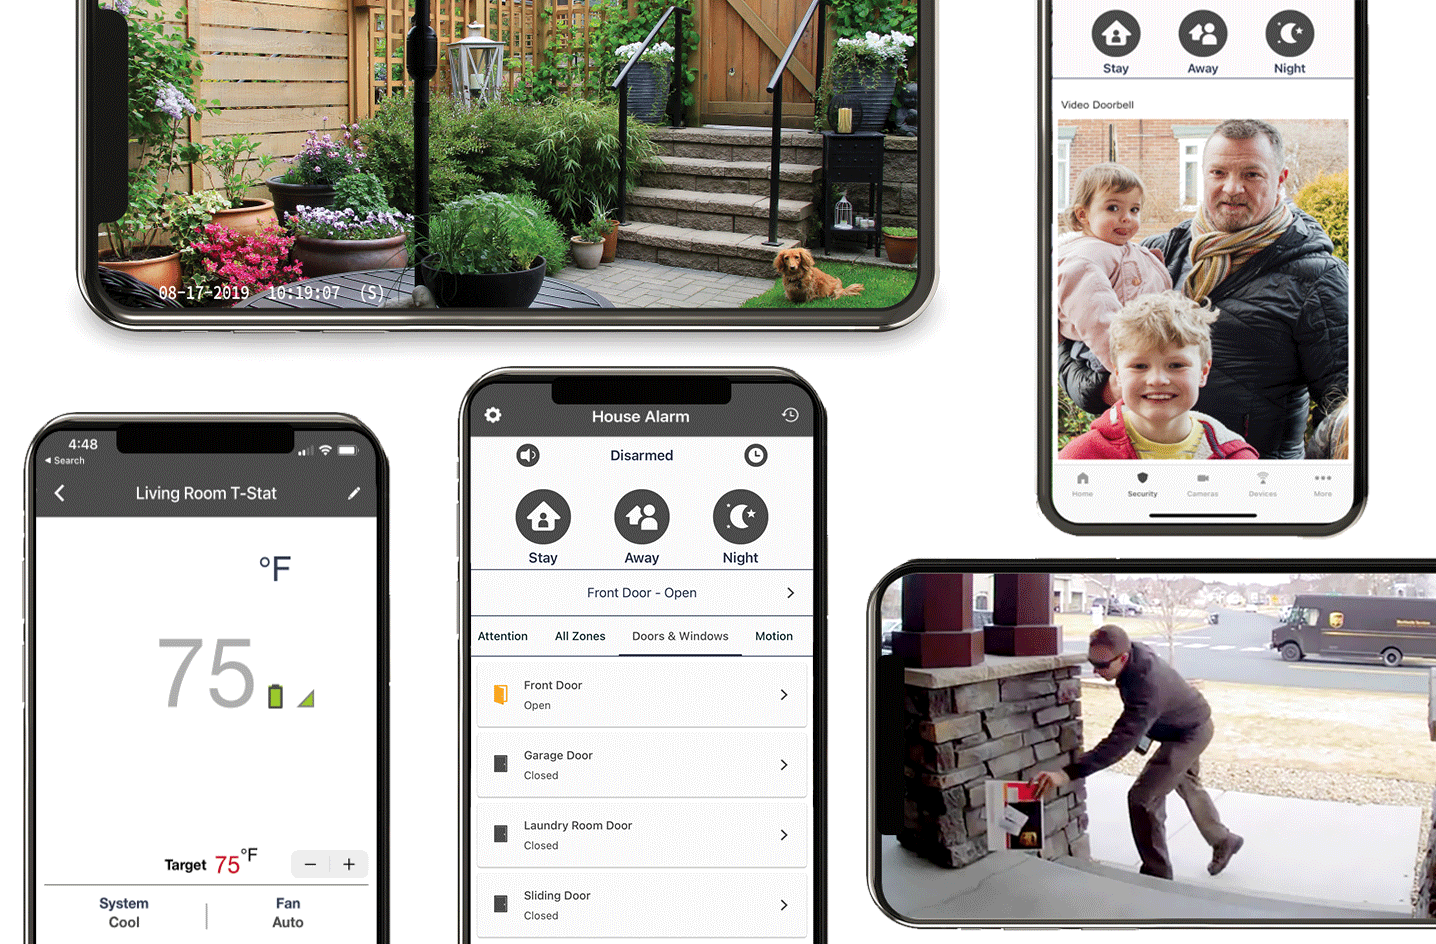 Examples of mobile app screens for cameras, security system, and smart home controls.